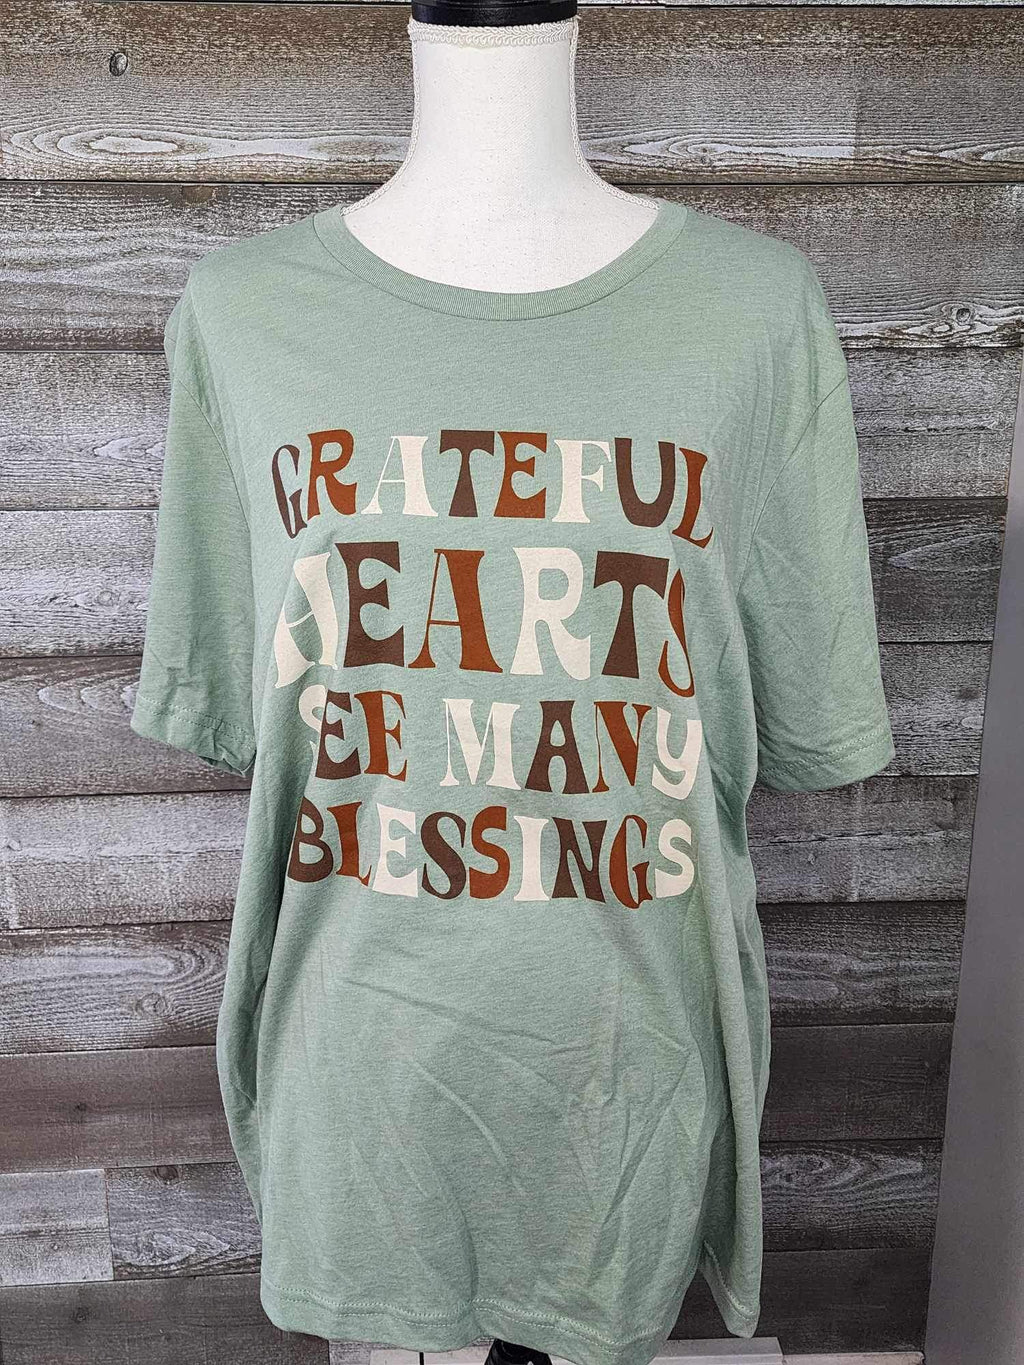 Grateful Hearts See Many Blessings Tee